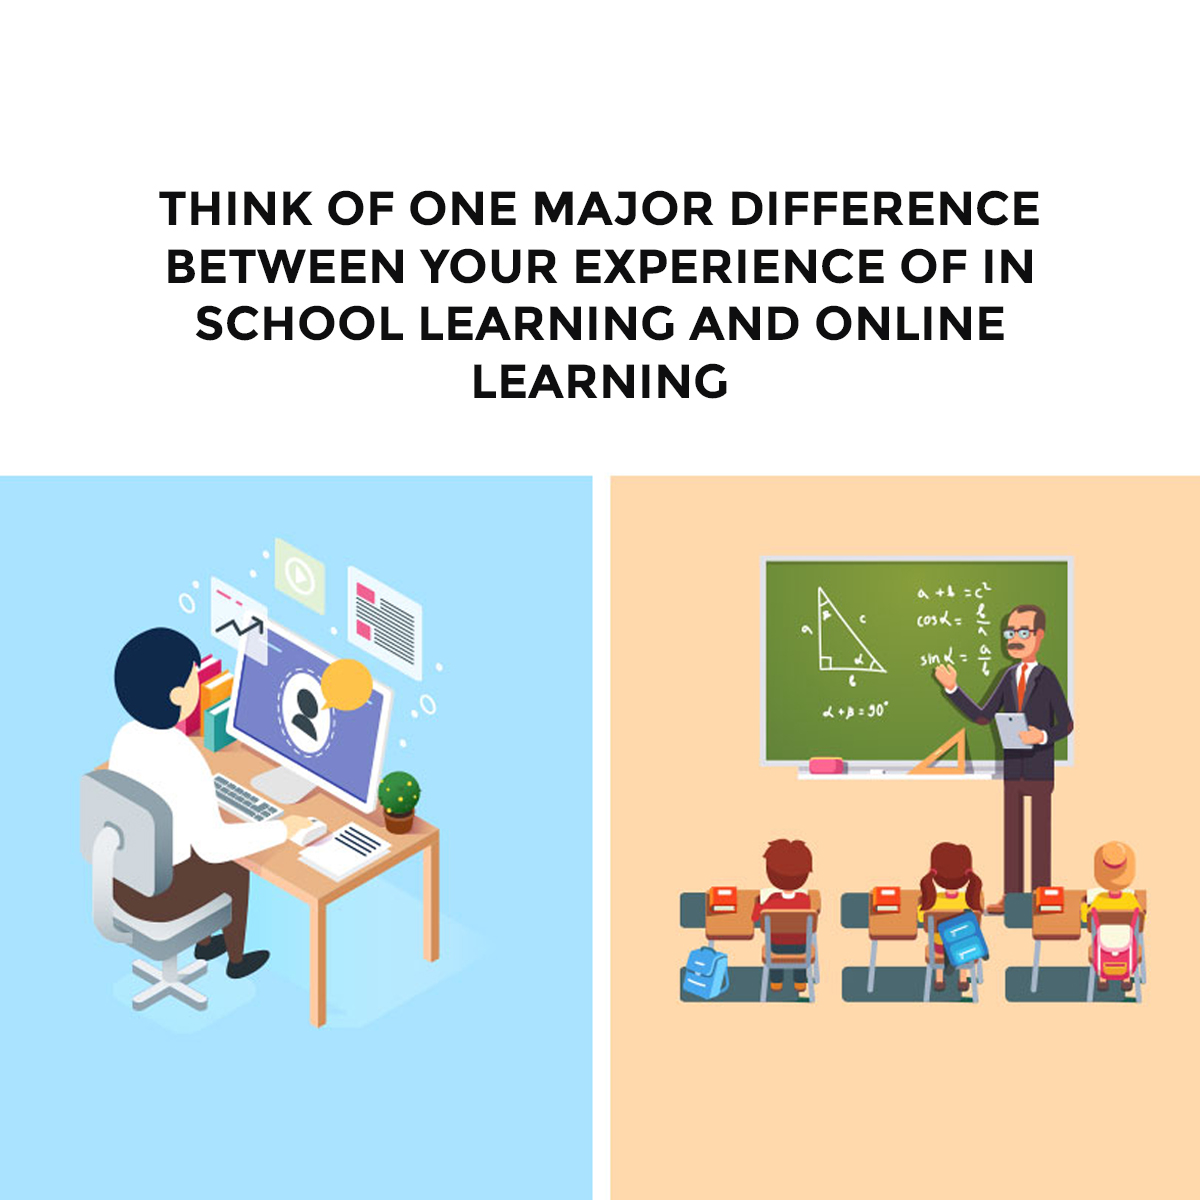 Think of one major difference between your experience of in-school learning and online learning about the differences